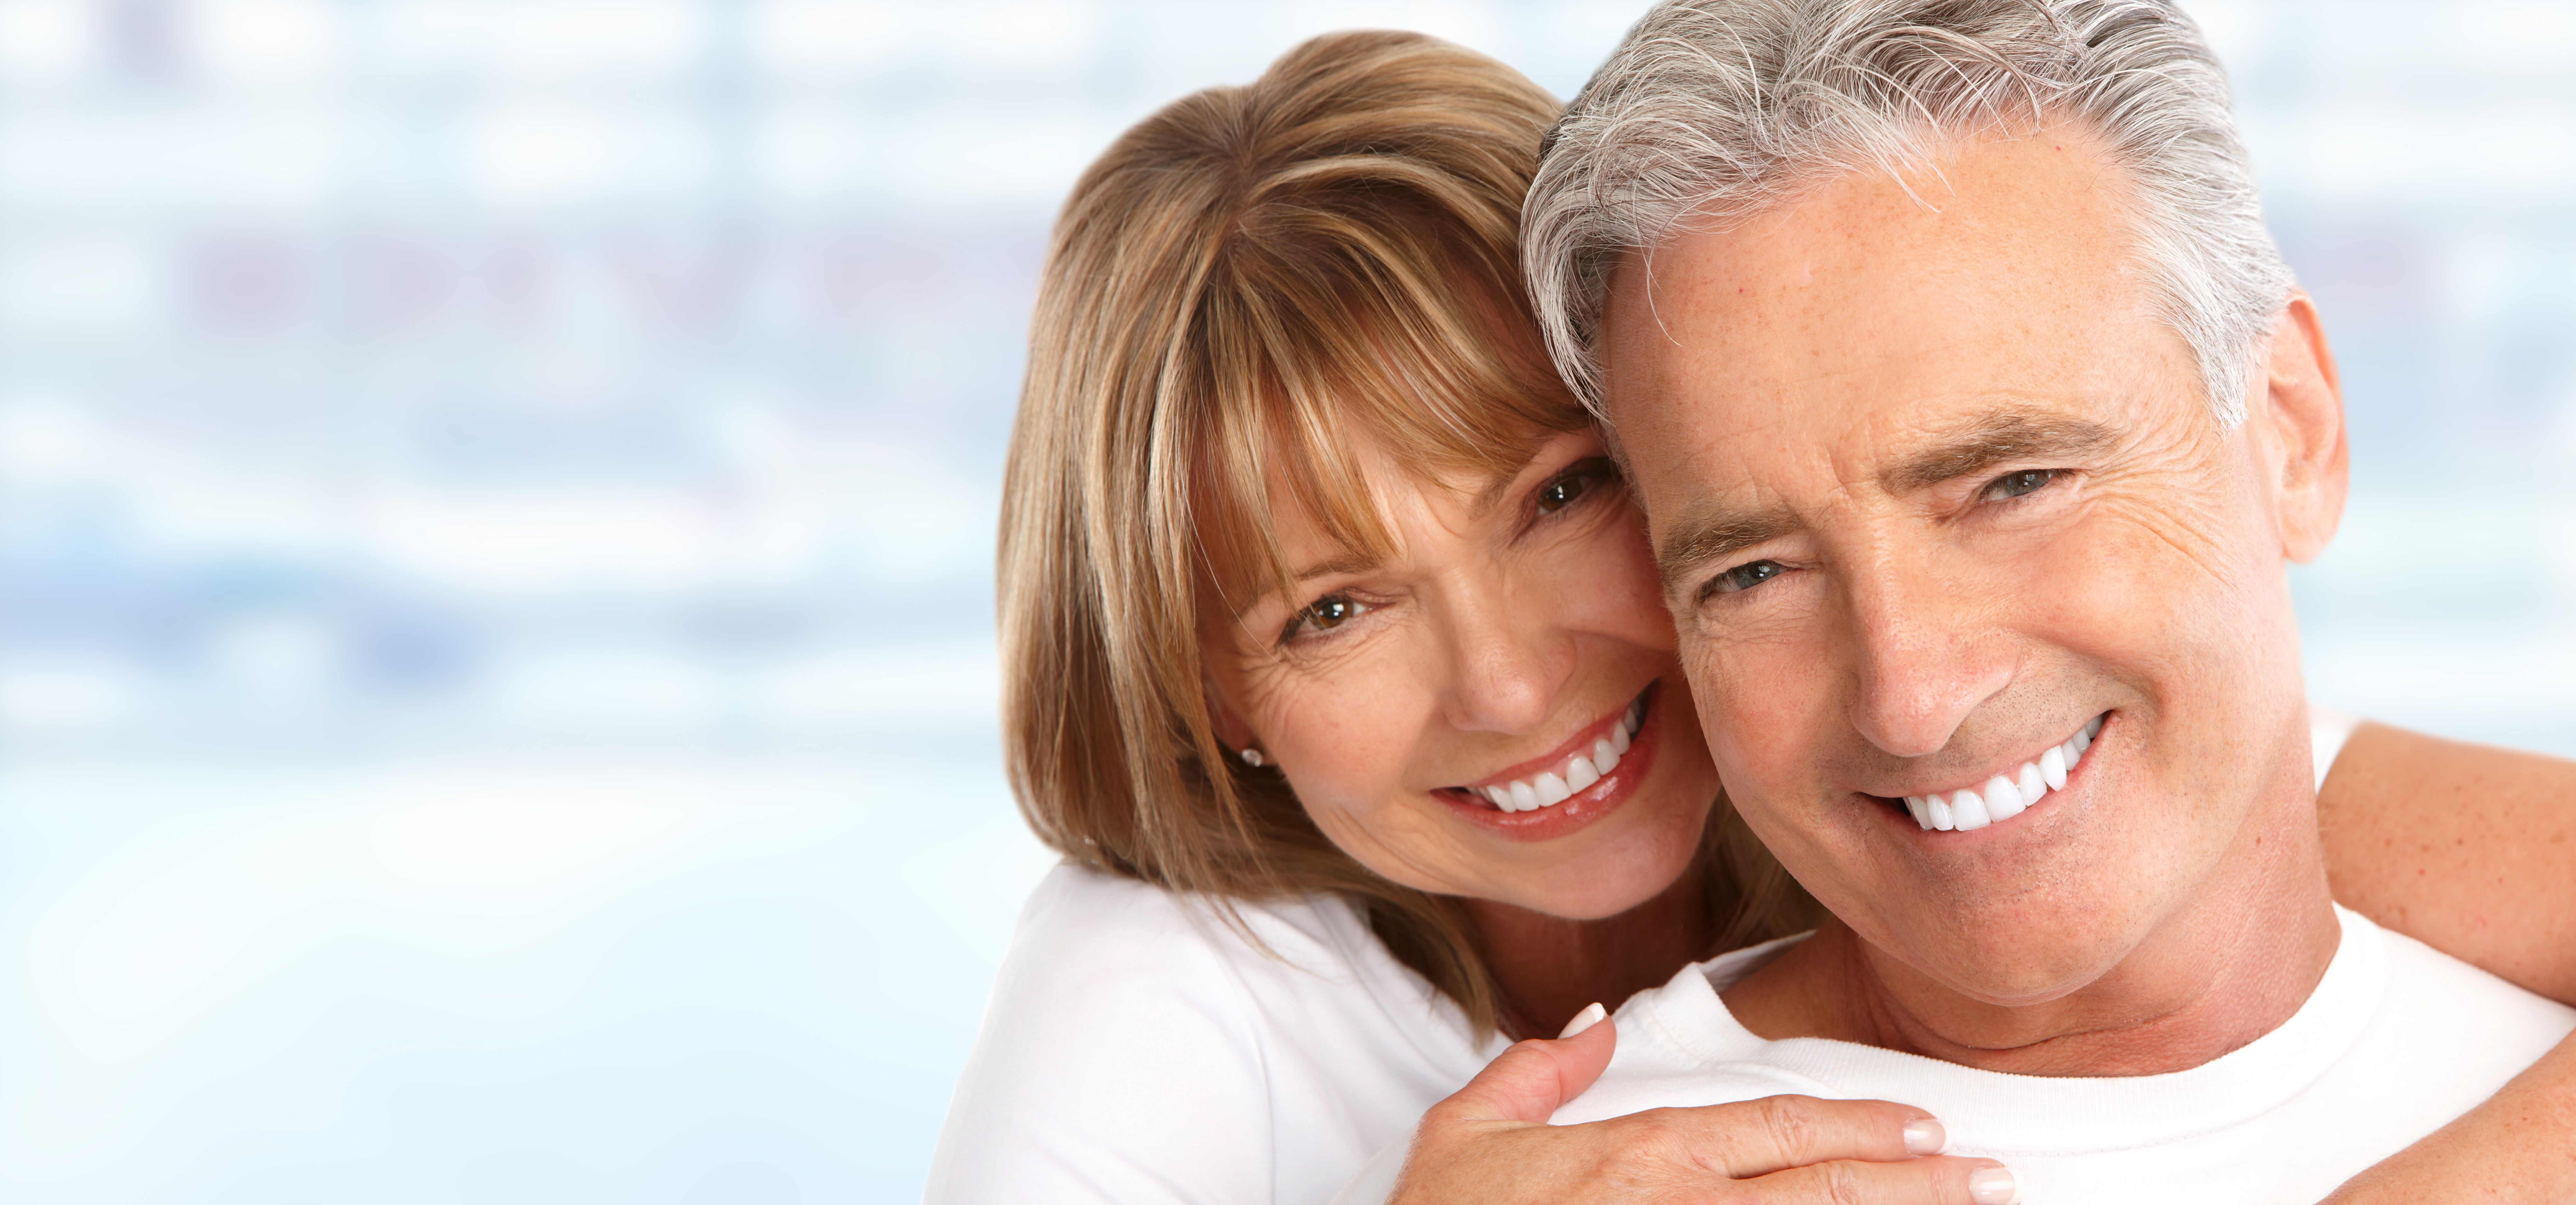 Different Dental Implant Treatments Available